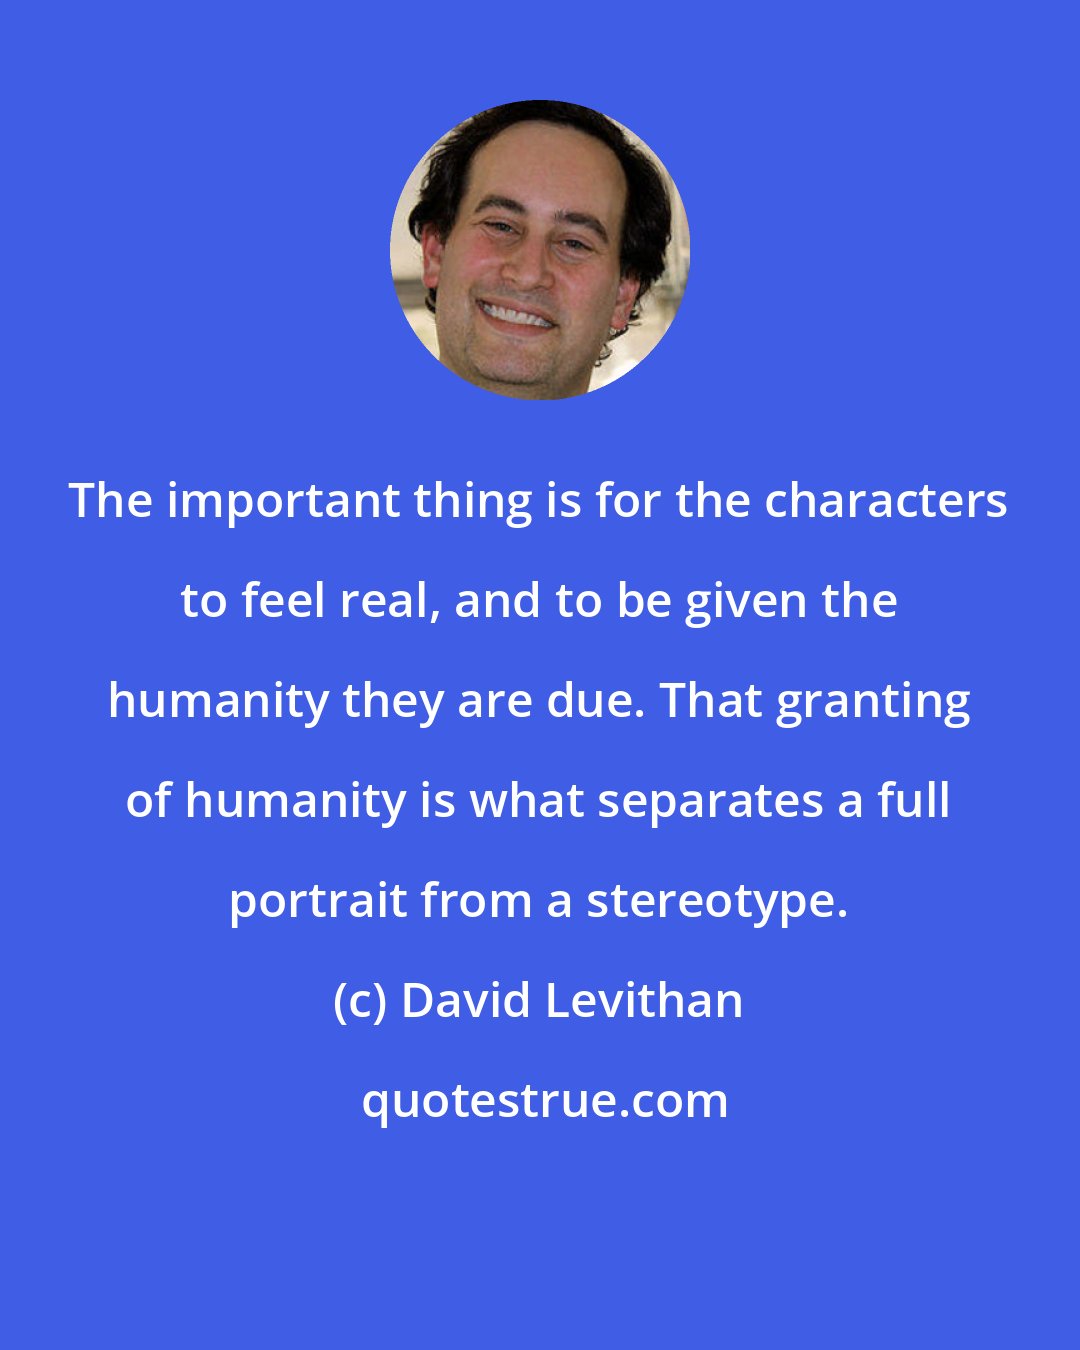 David Levithan: The important thing is for the characters to feel real, and to be given the humanity they are due. That granting of humanity is what separates a full portrait from a stereotype.